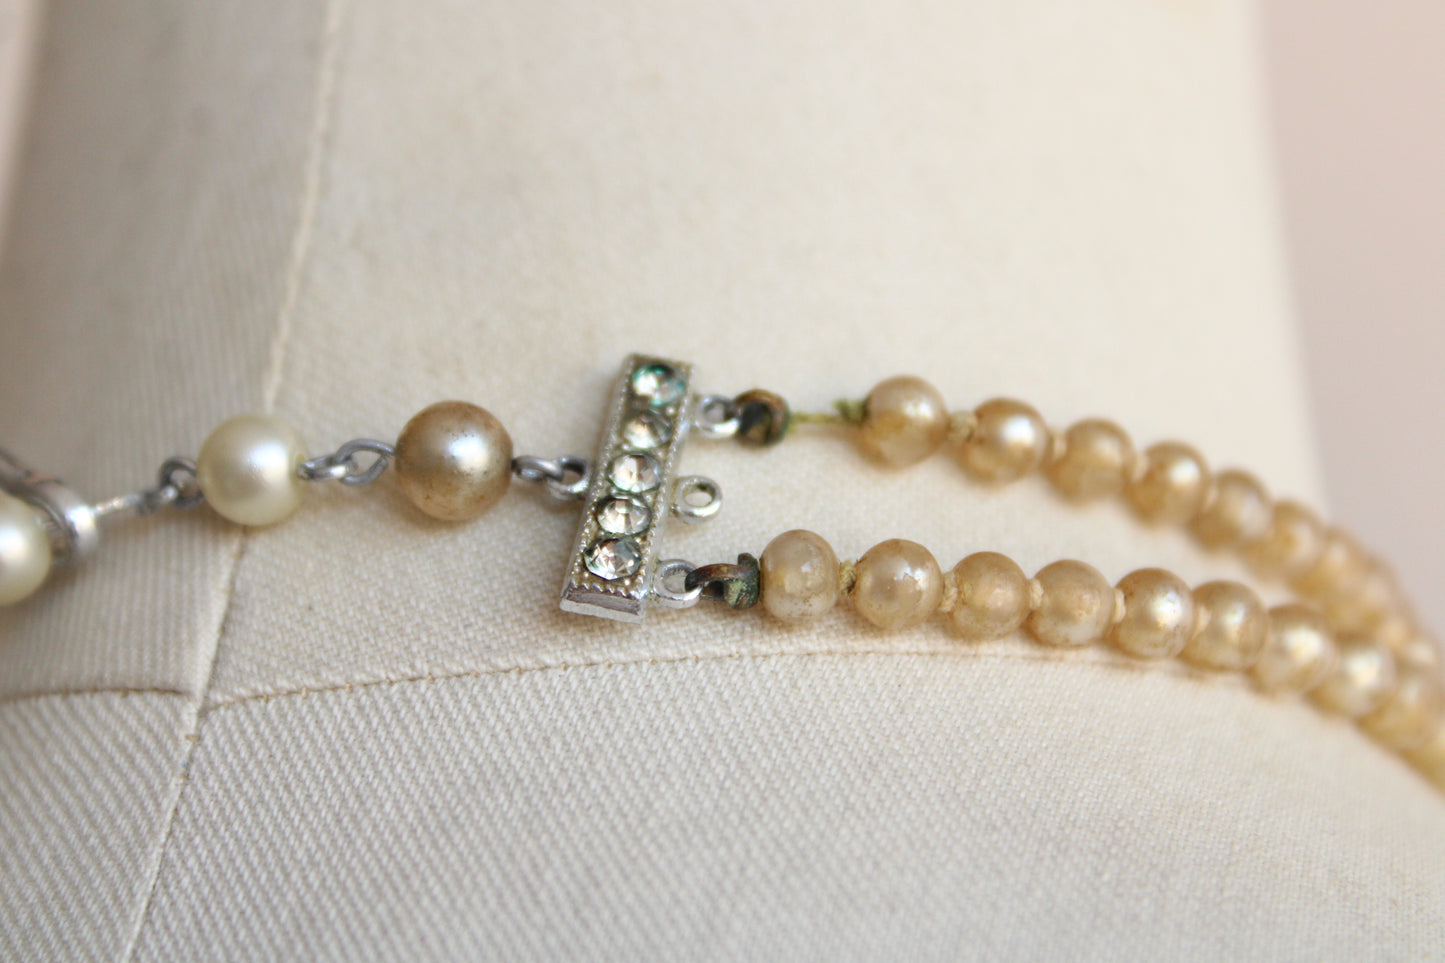 Vintage 1960s Necklace, Double Strand of Faux Pearls